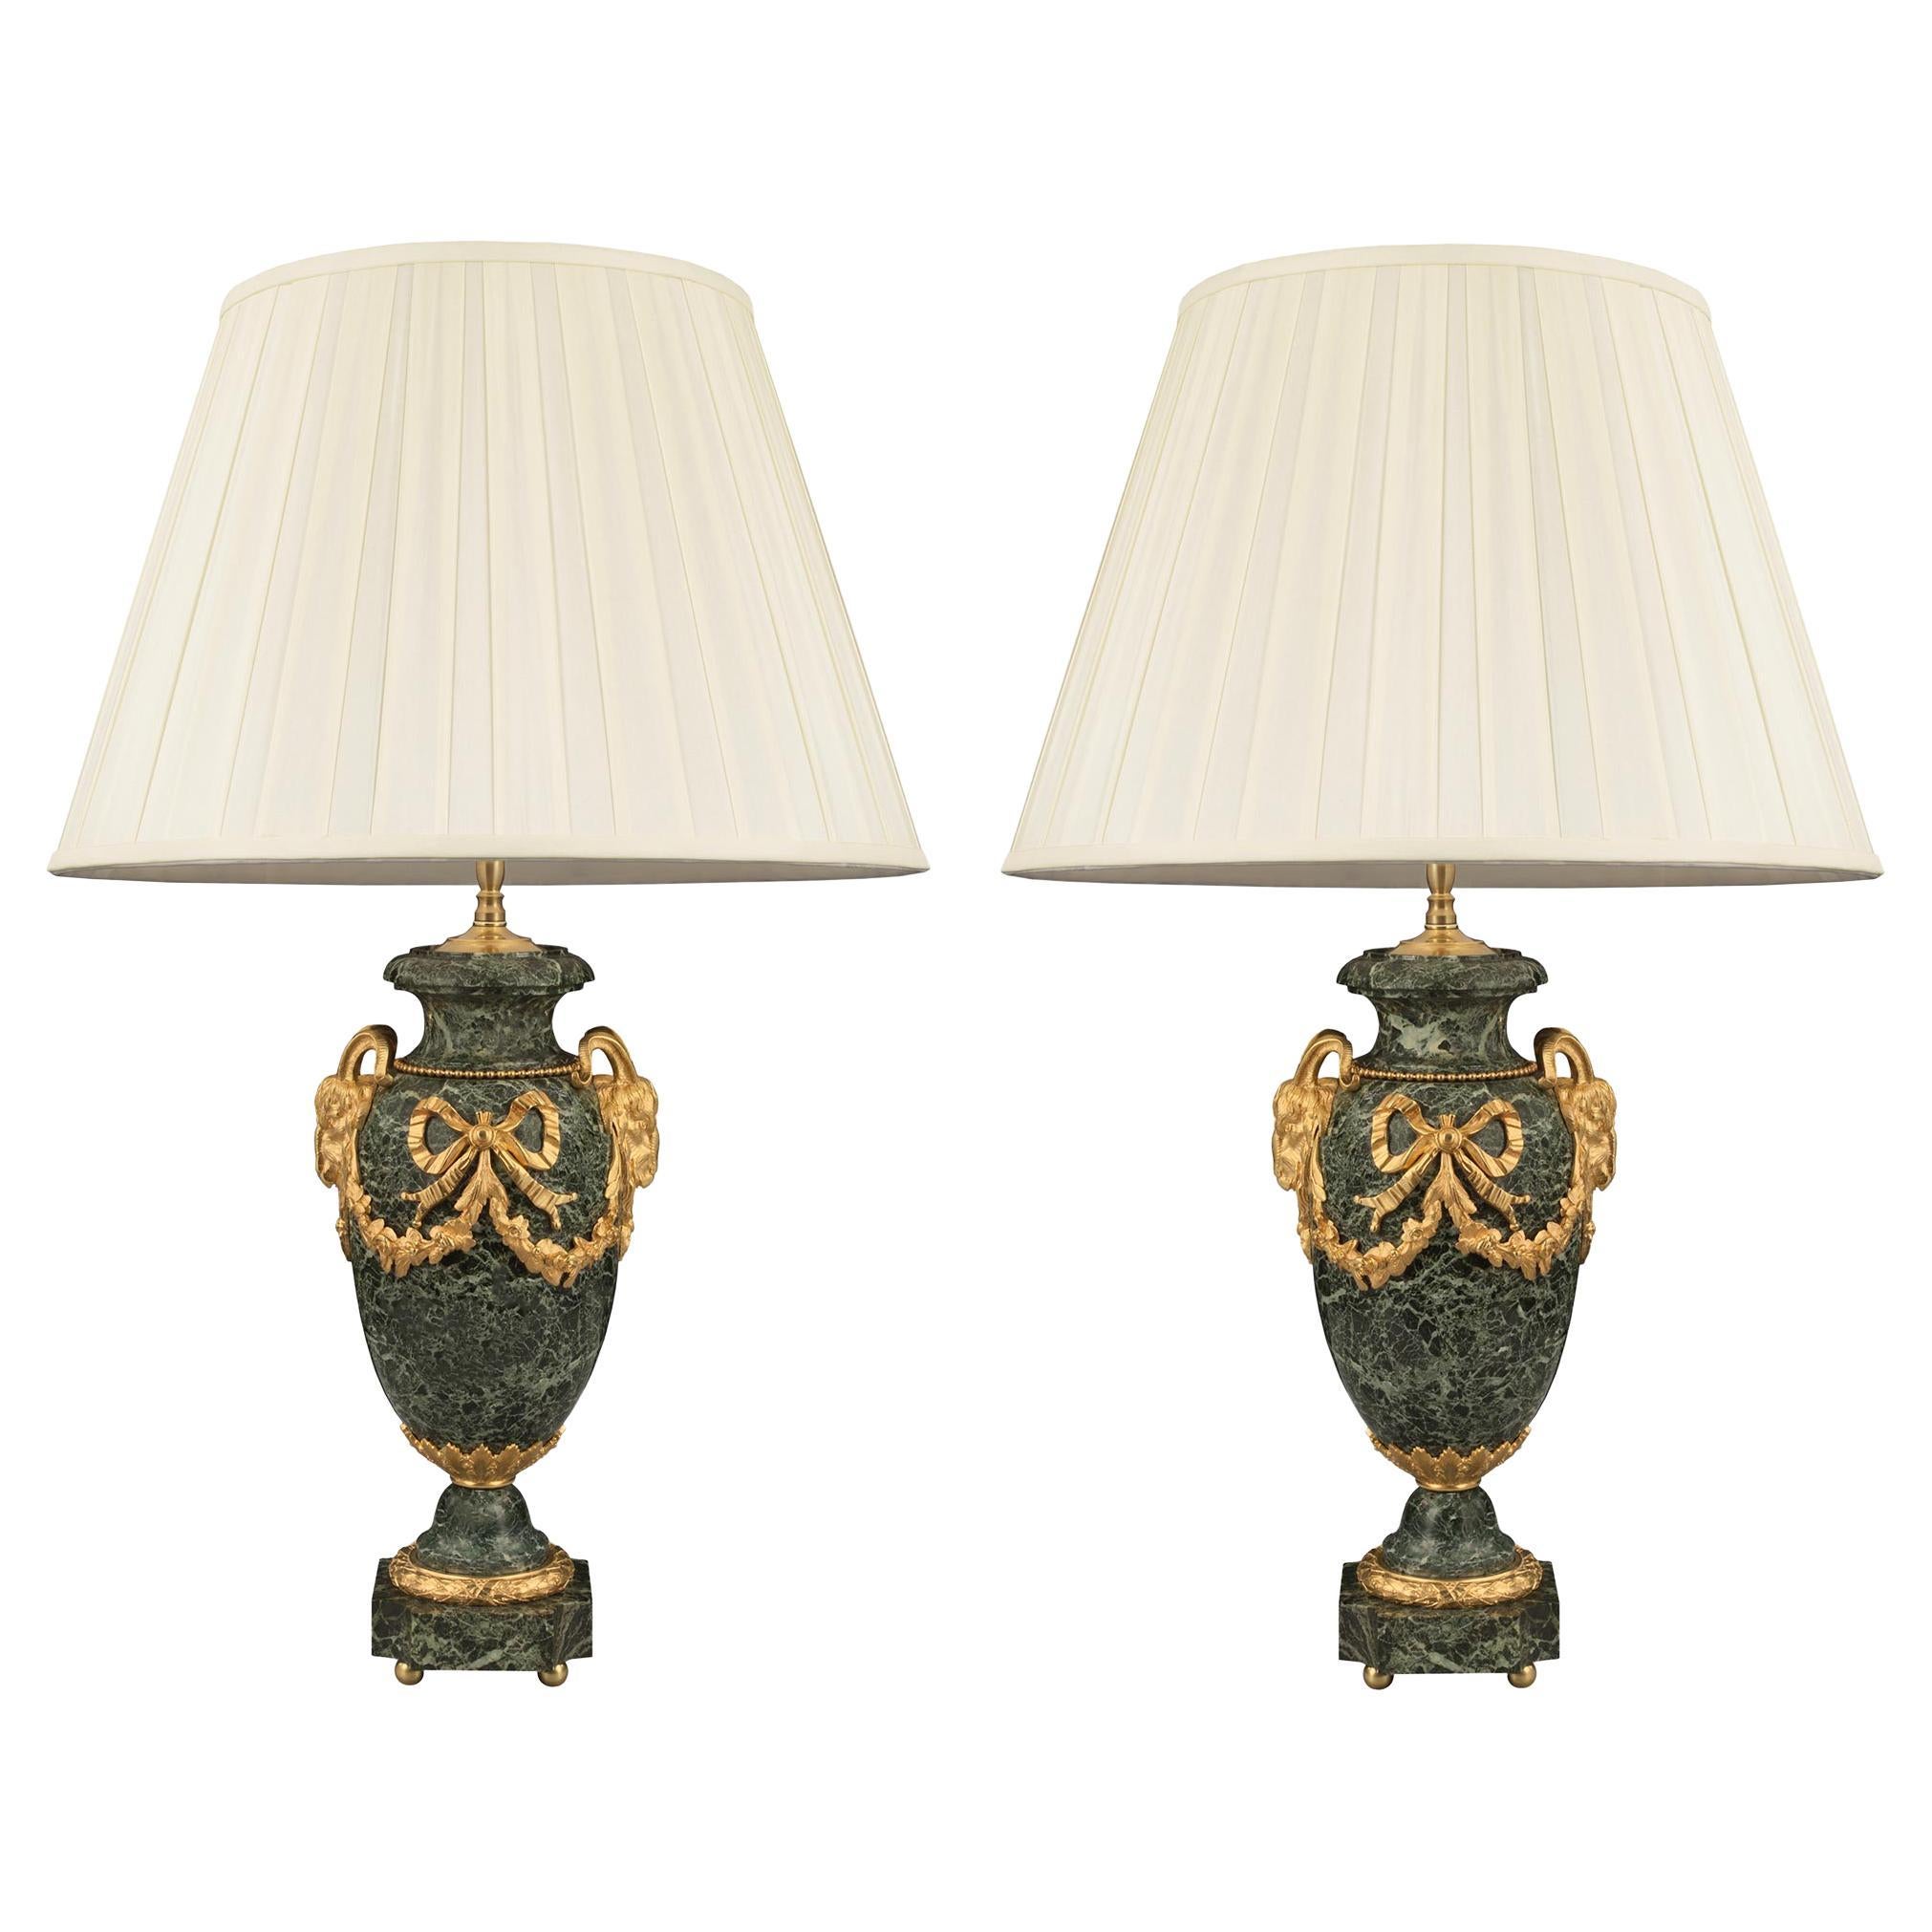 Pair of French Mid-19th Century Louis XVI Style Marble and Ormolu Lamps For Sale